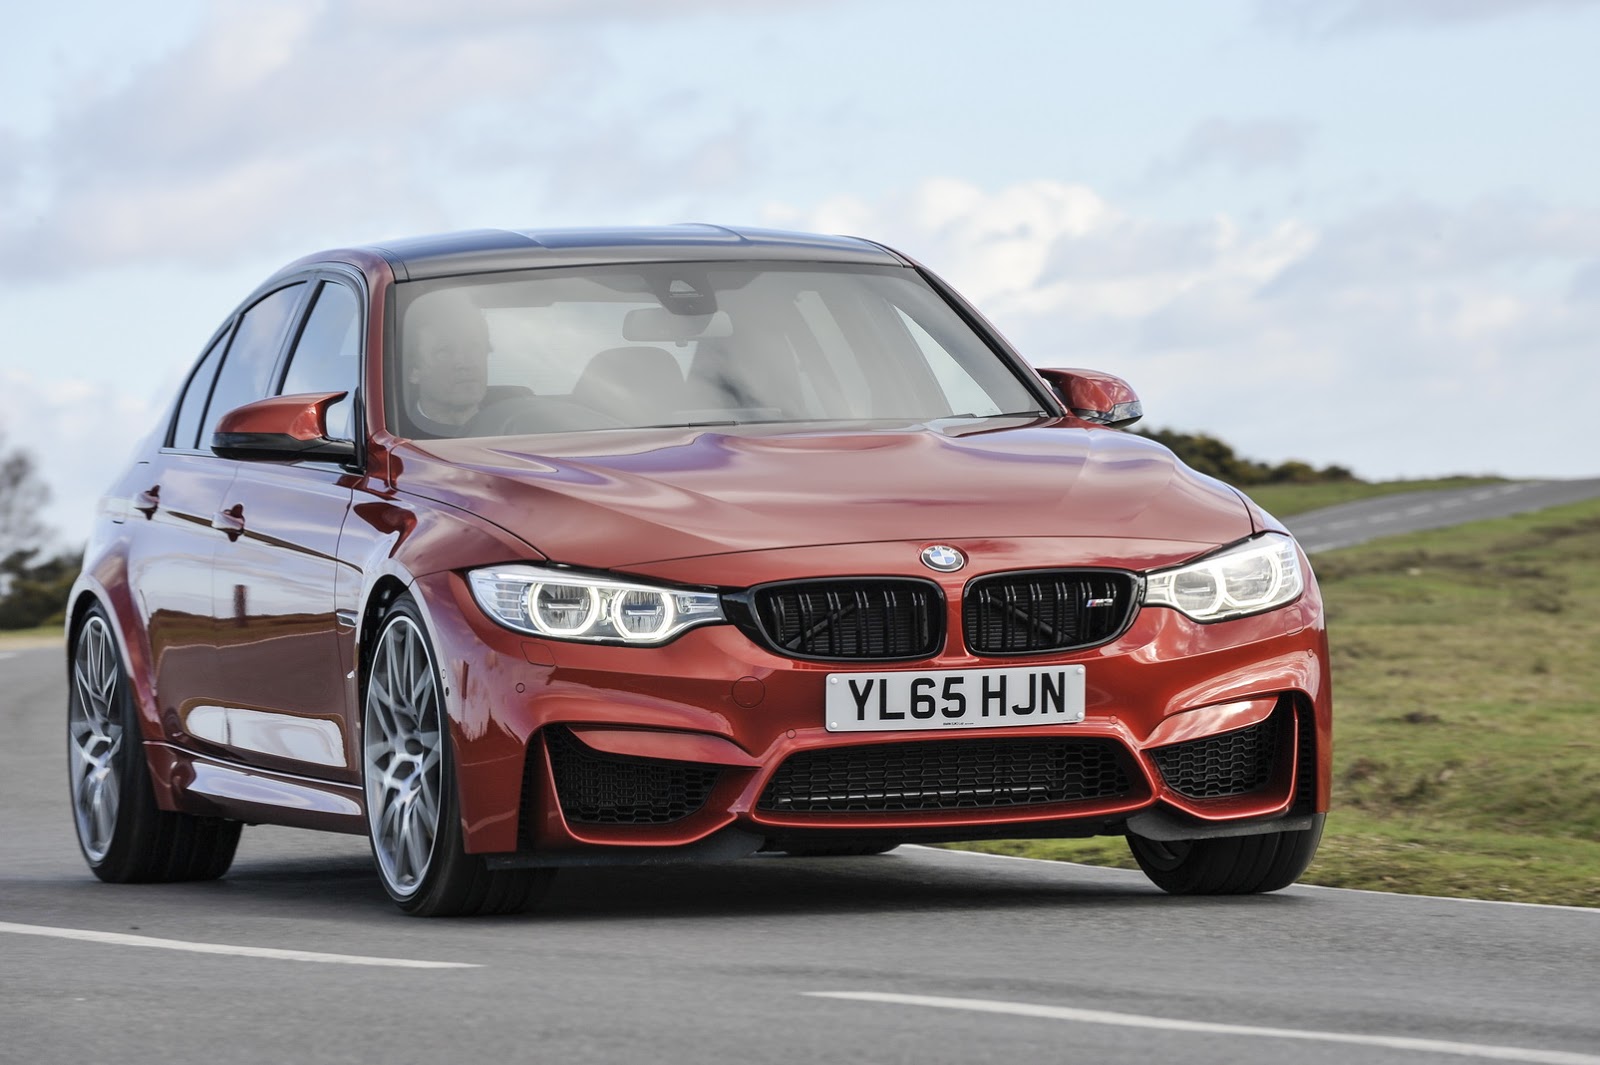 UK: BMW M3 & M4 with Competition Package – Prices and Details Released